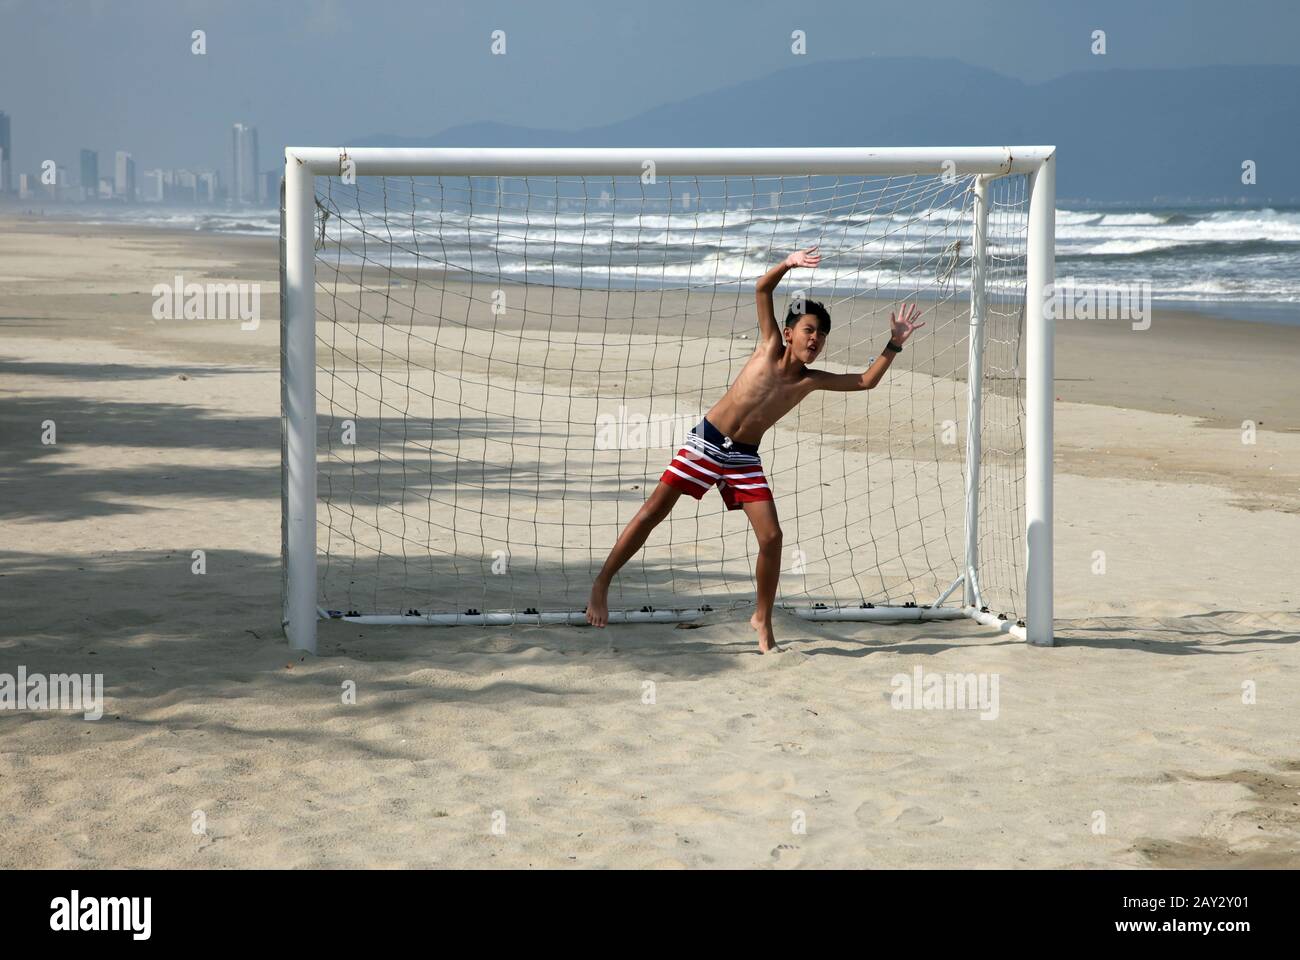 Kid goalkeeper playing on a football or soccer game on the beach Stock Photo